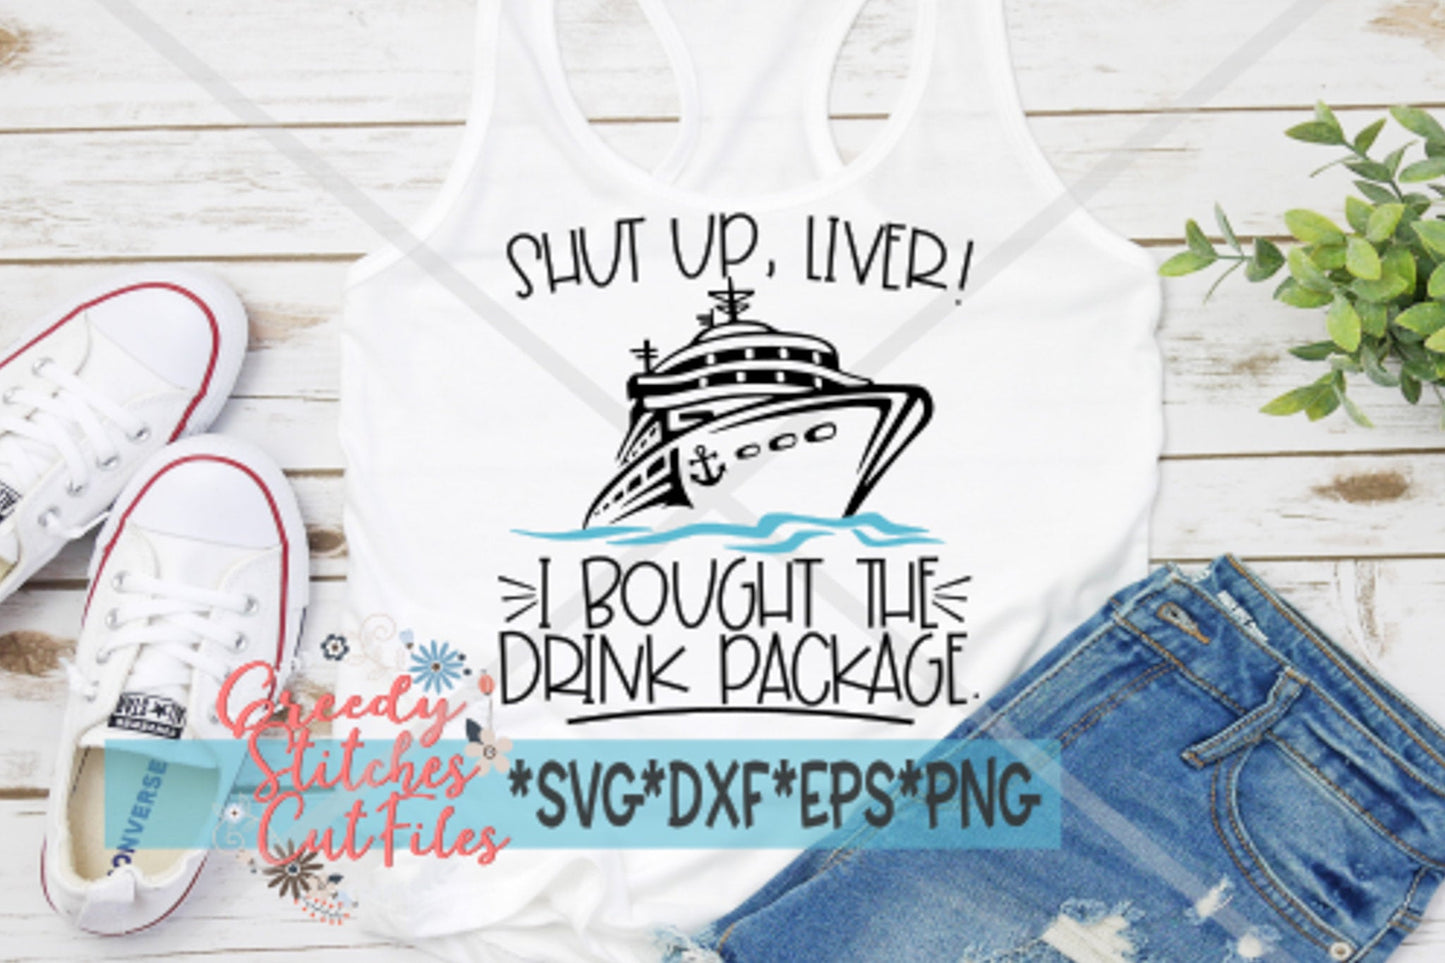 Cruise SvG | Shut Up Liver! I Bought The Drink Package svg, dxf, eps png. Cruise SvG | Cheers SvG | Cruising SvG | Instant Download Cut File